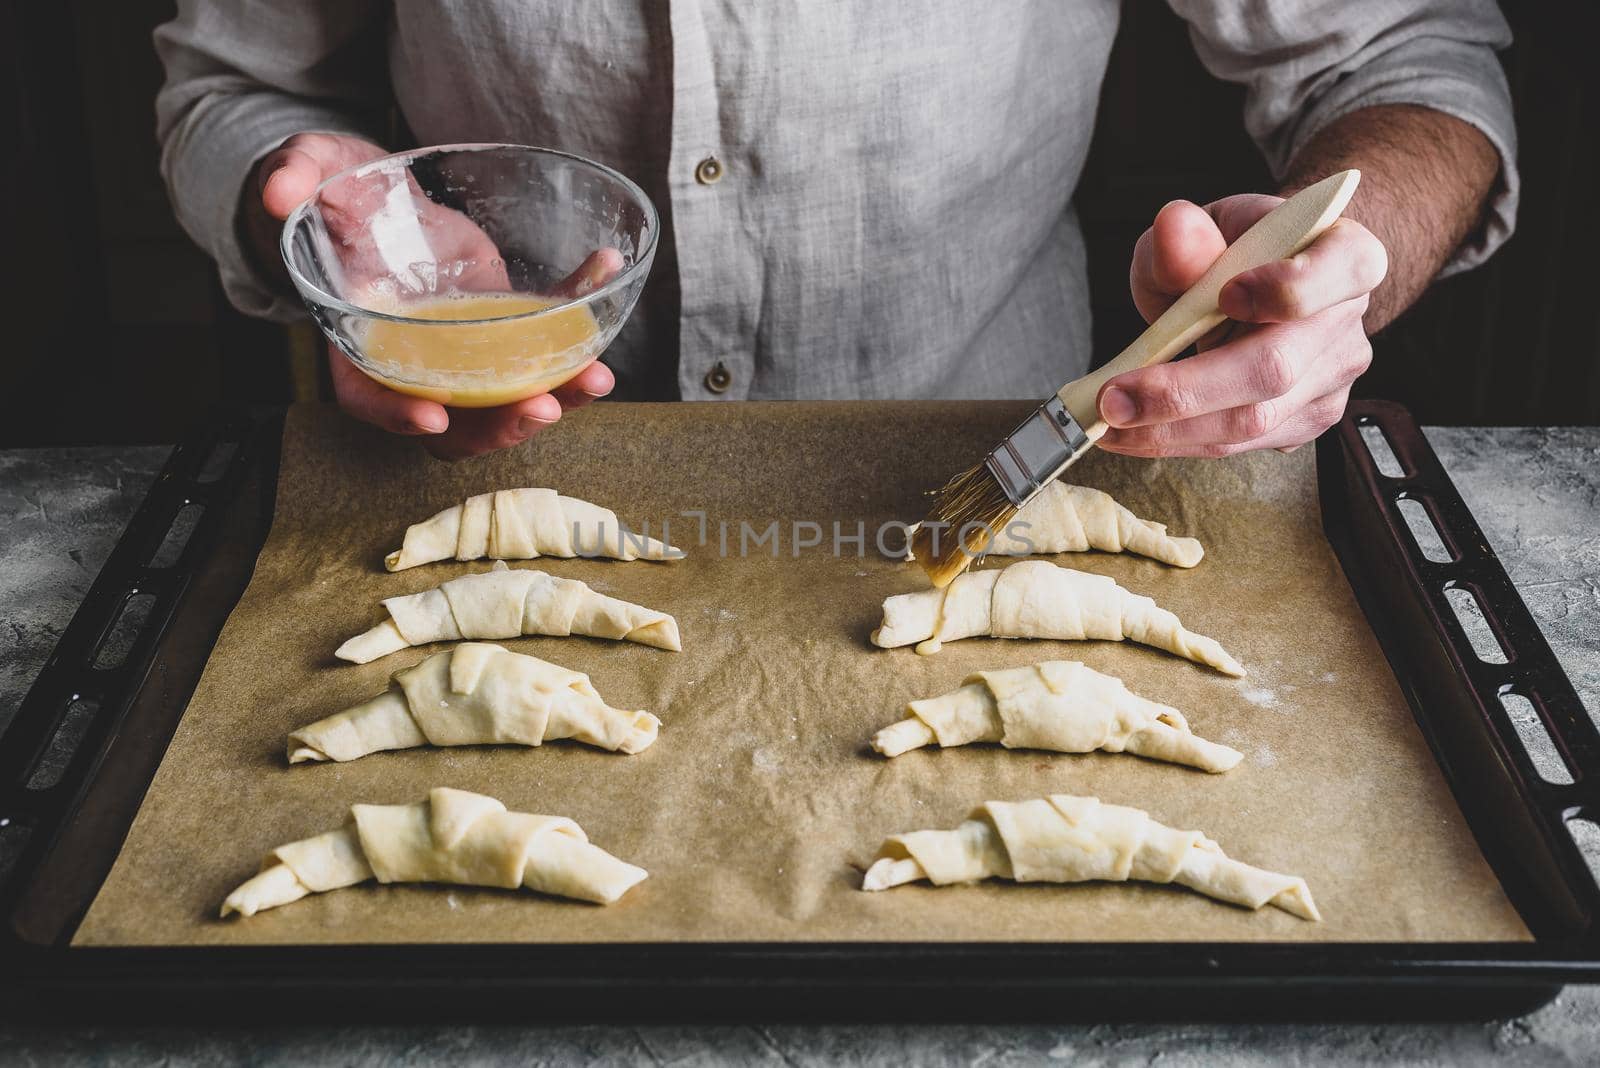 Baking sheet of raw homemade croissants stuffed with chocolate spread